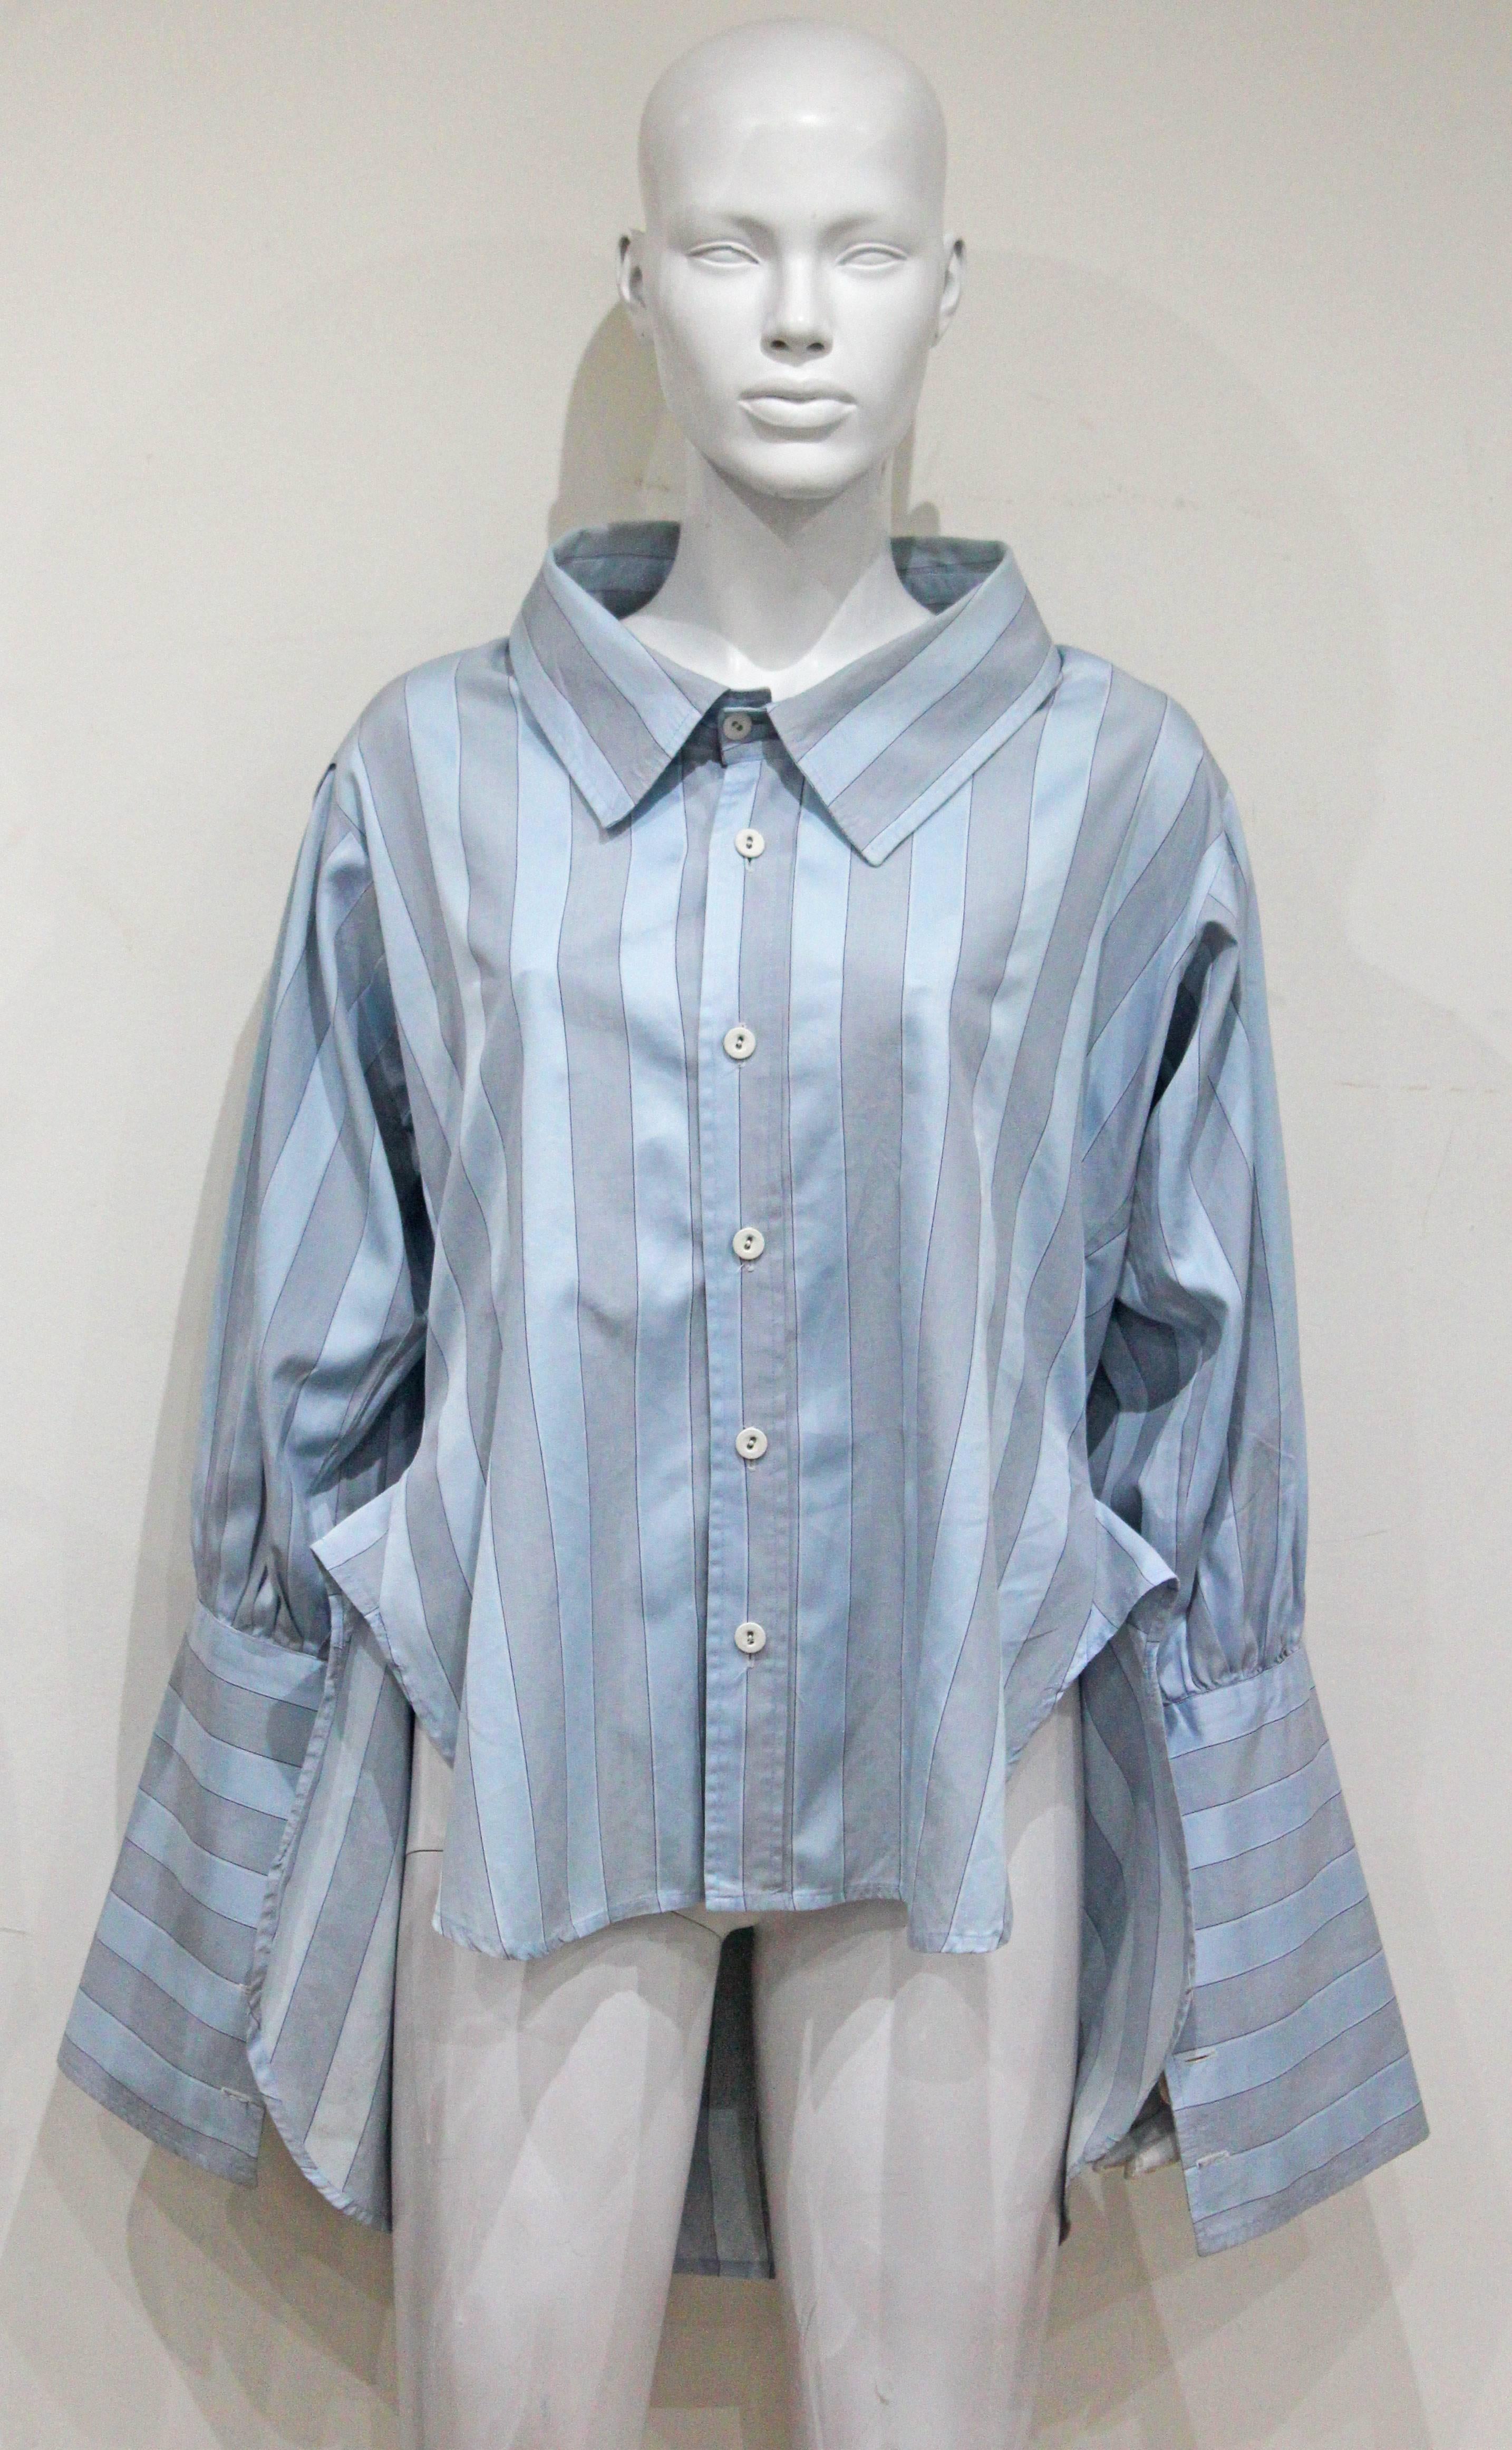 Gray Worlds End by Vivienne Westwood and Malcolm McLaren oversized shirt, c. 1981